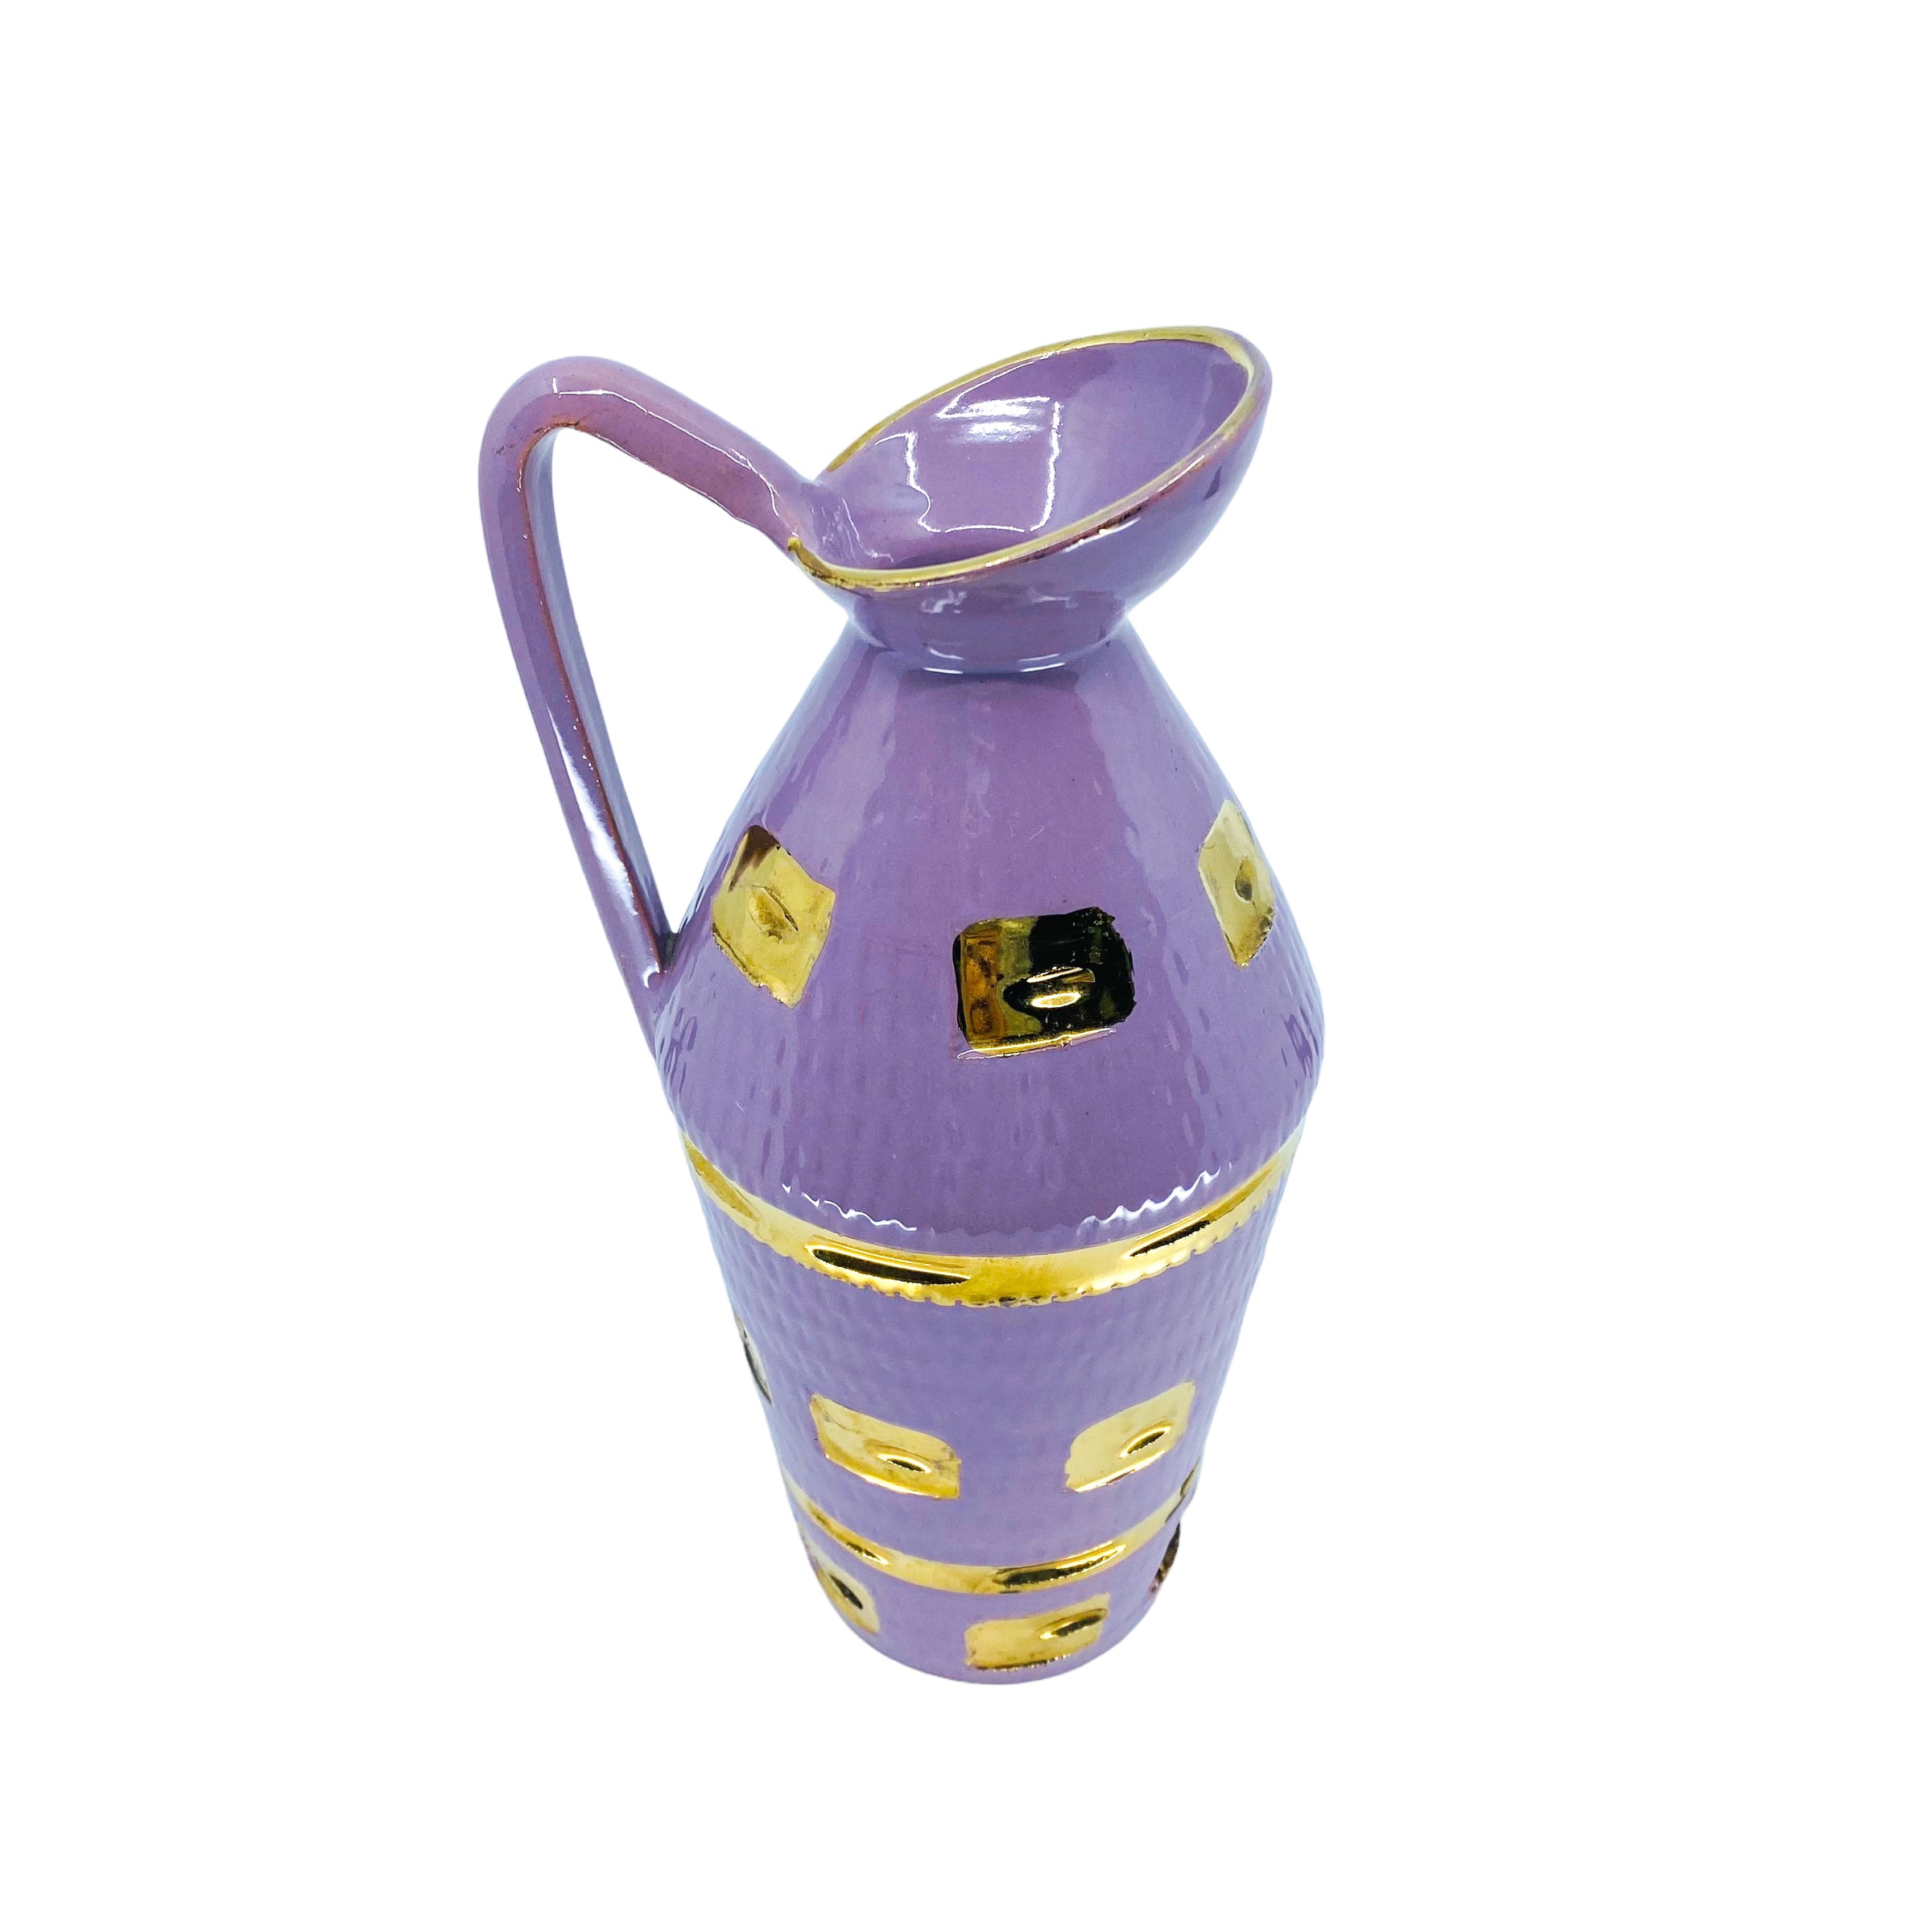 Vintage Made in Italy Lavender & Gold Ceramic Pitcher